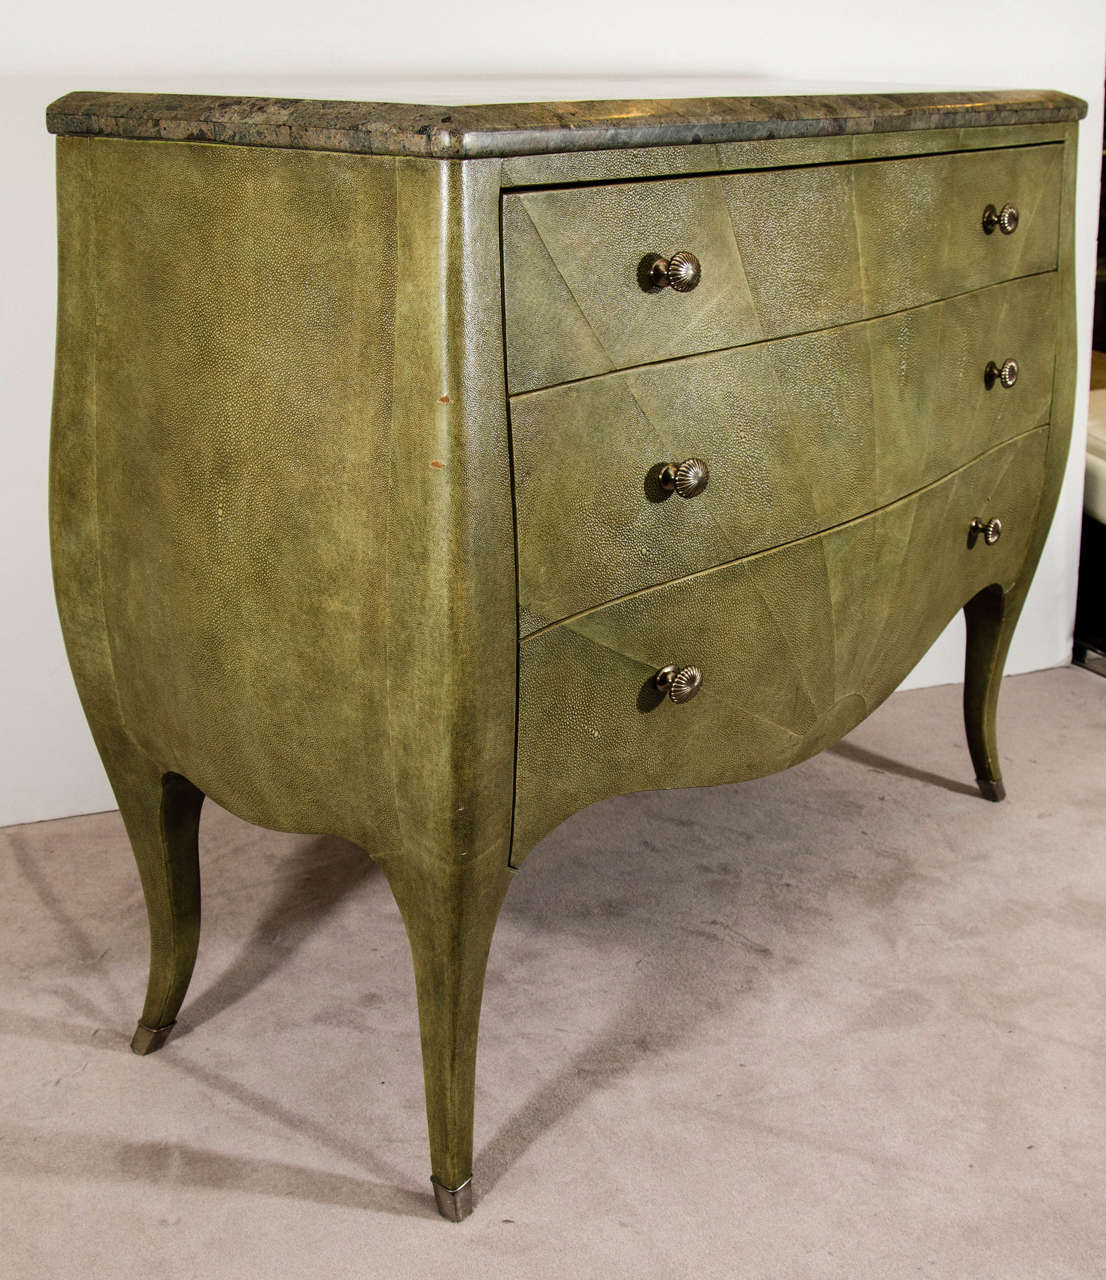 A vintage shagreen three-drawer Bogart Collection bombe chest or commode with pieced marble veneer top by Thomasville. Retains its original label. Good condition with age appropriate wear and patina. A few dings to sides and edges of chest and a